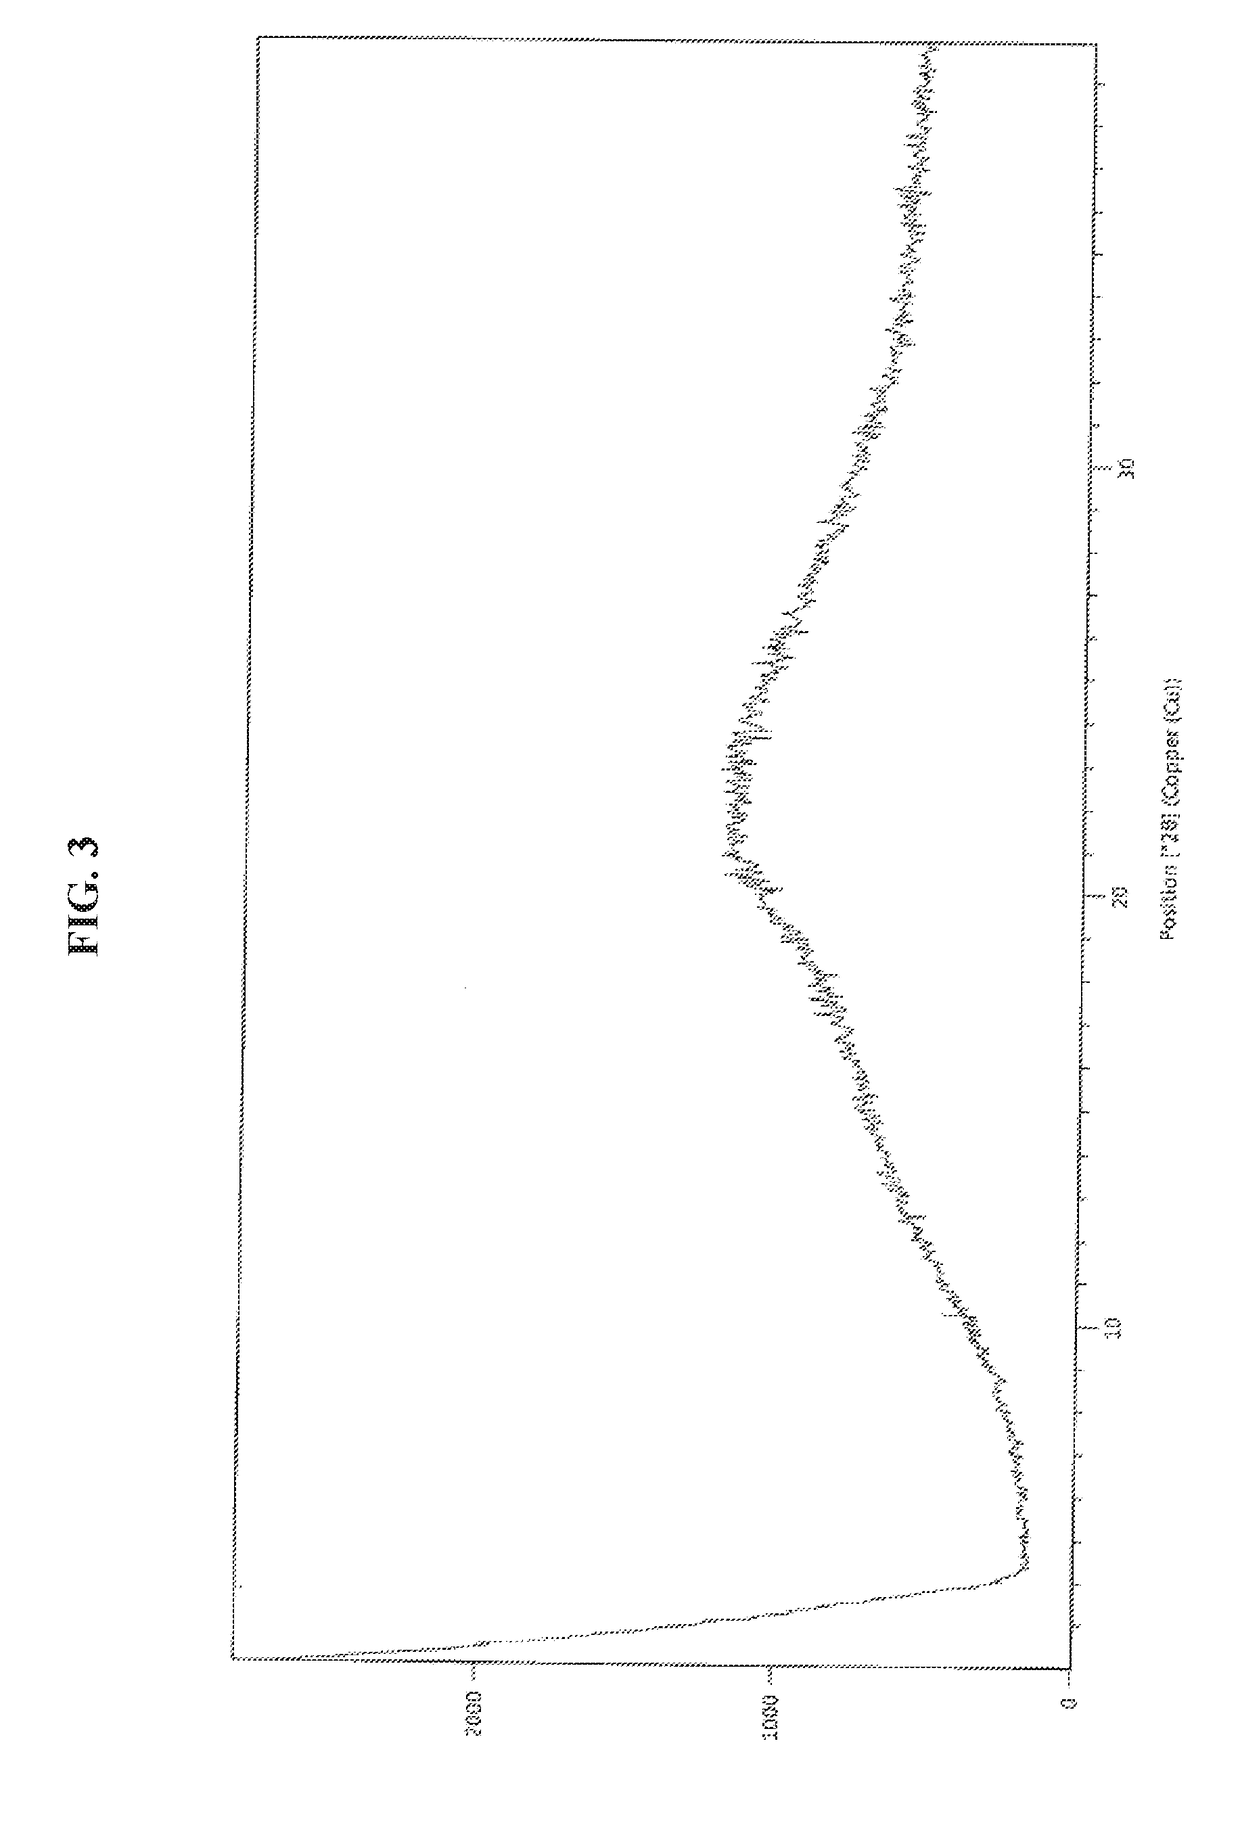 Amorphous form of daclatasvir and its salts and process for preparation thereof